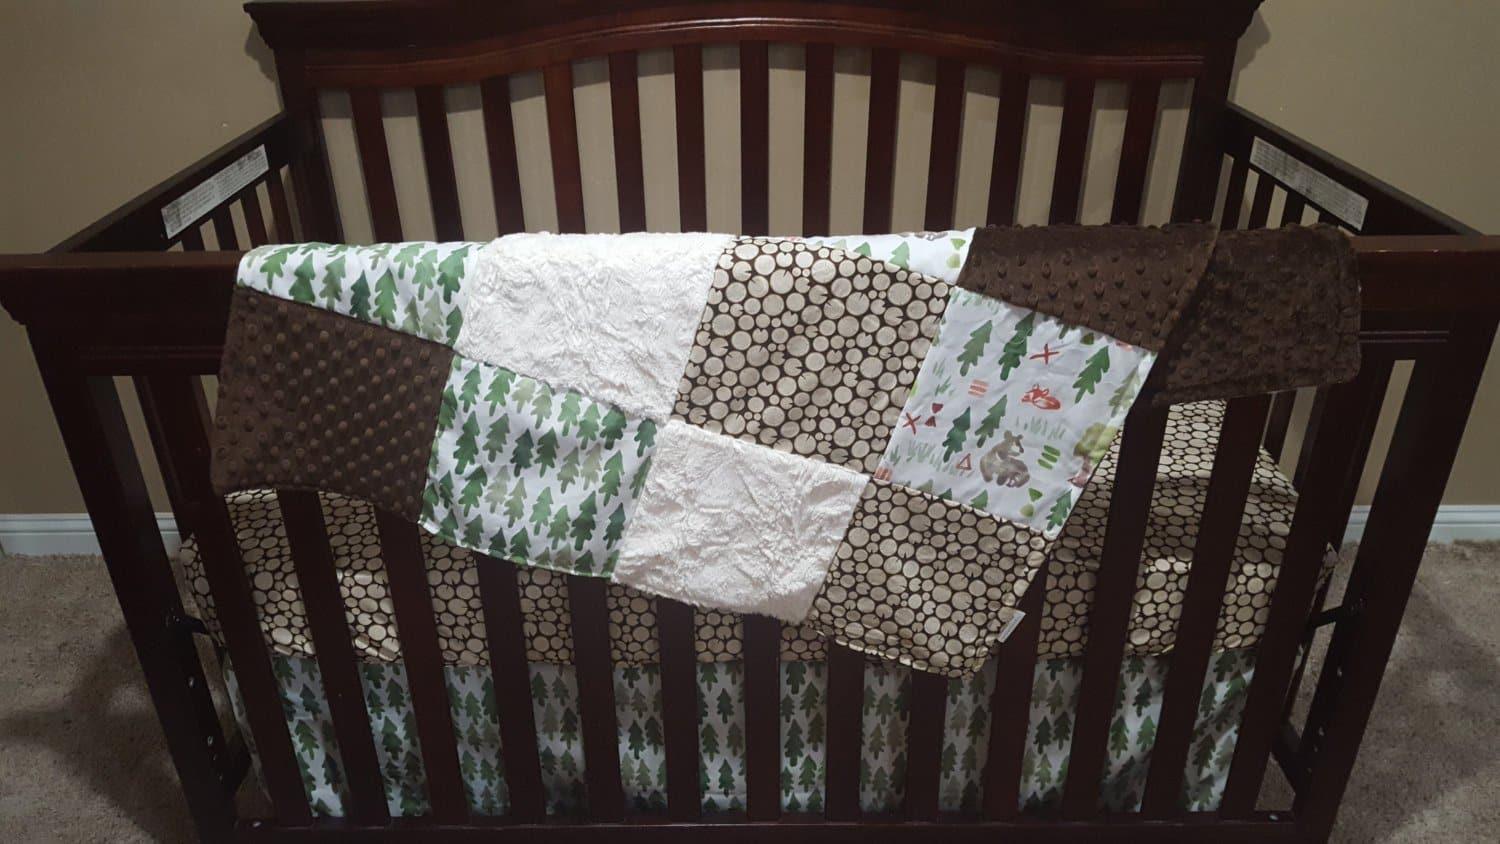 Woodland Boy Crib Bedding- Watercolor Forest, Pine Trees, Wood, Ivory Crushed Minky, and Brown Crib Bedding Ensemble - DBC Baby Bedding Co 